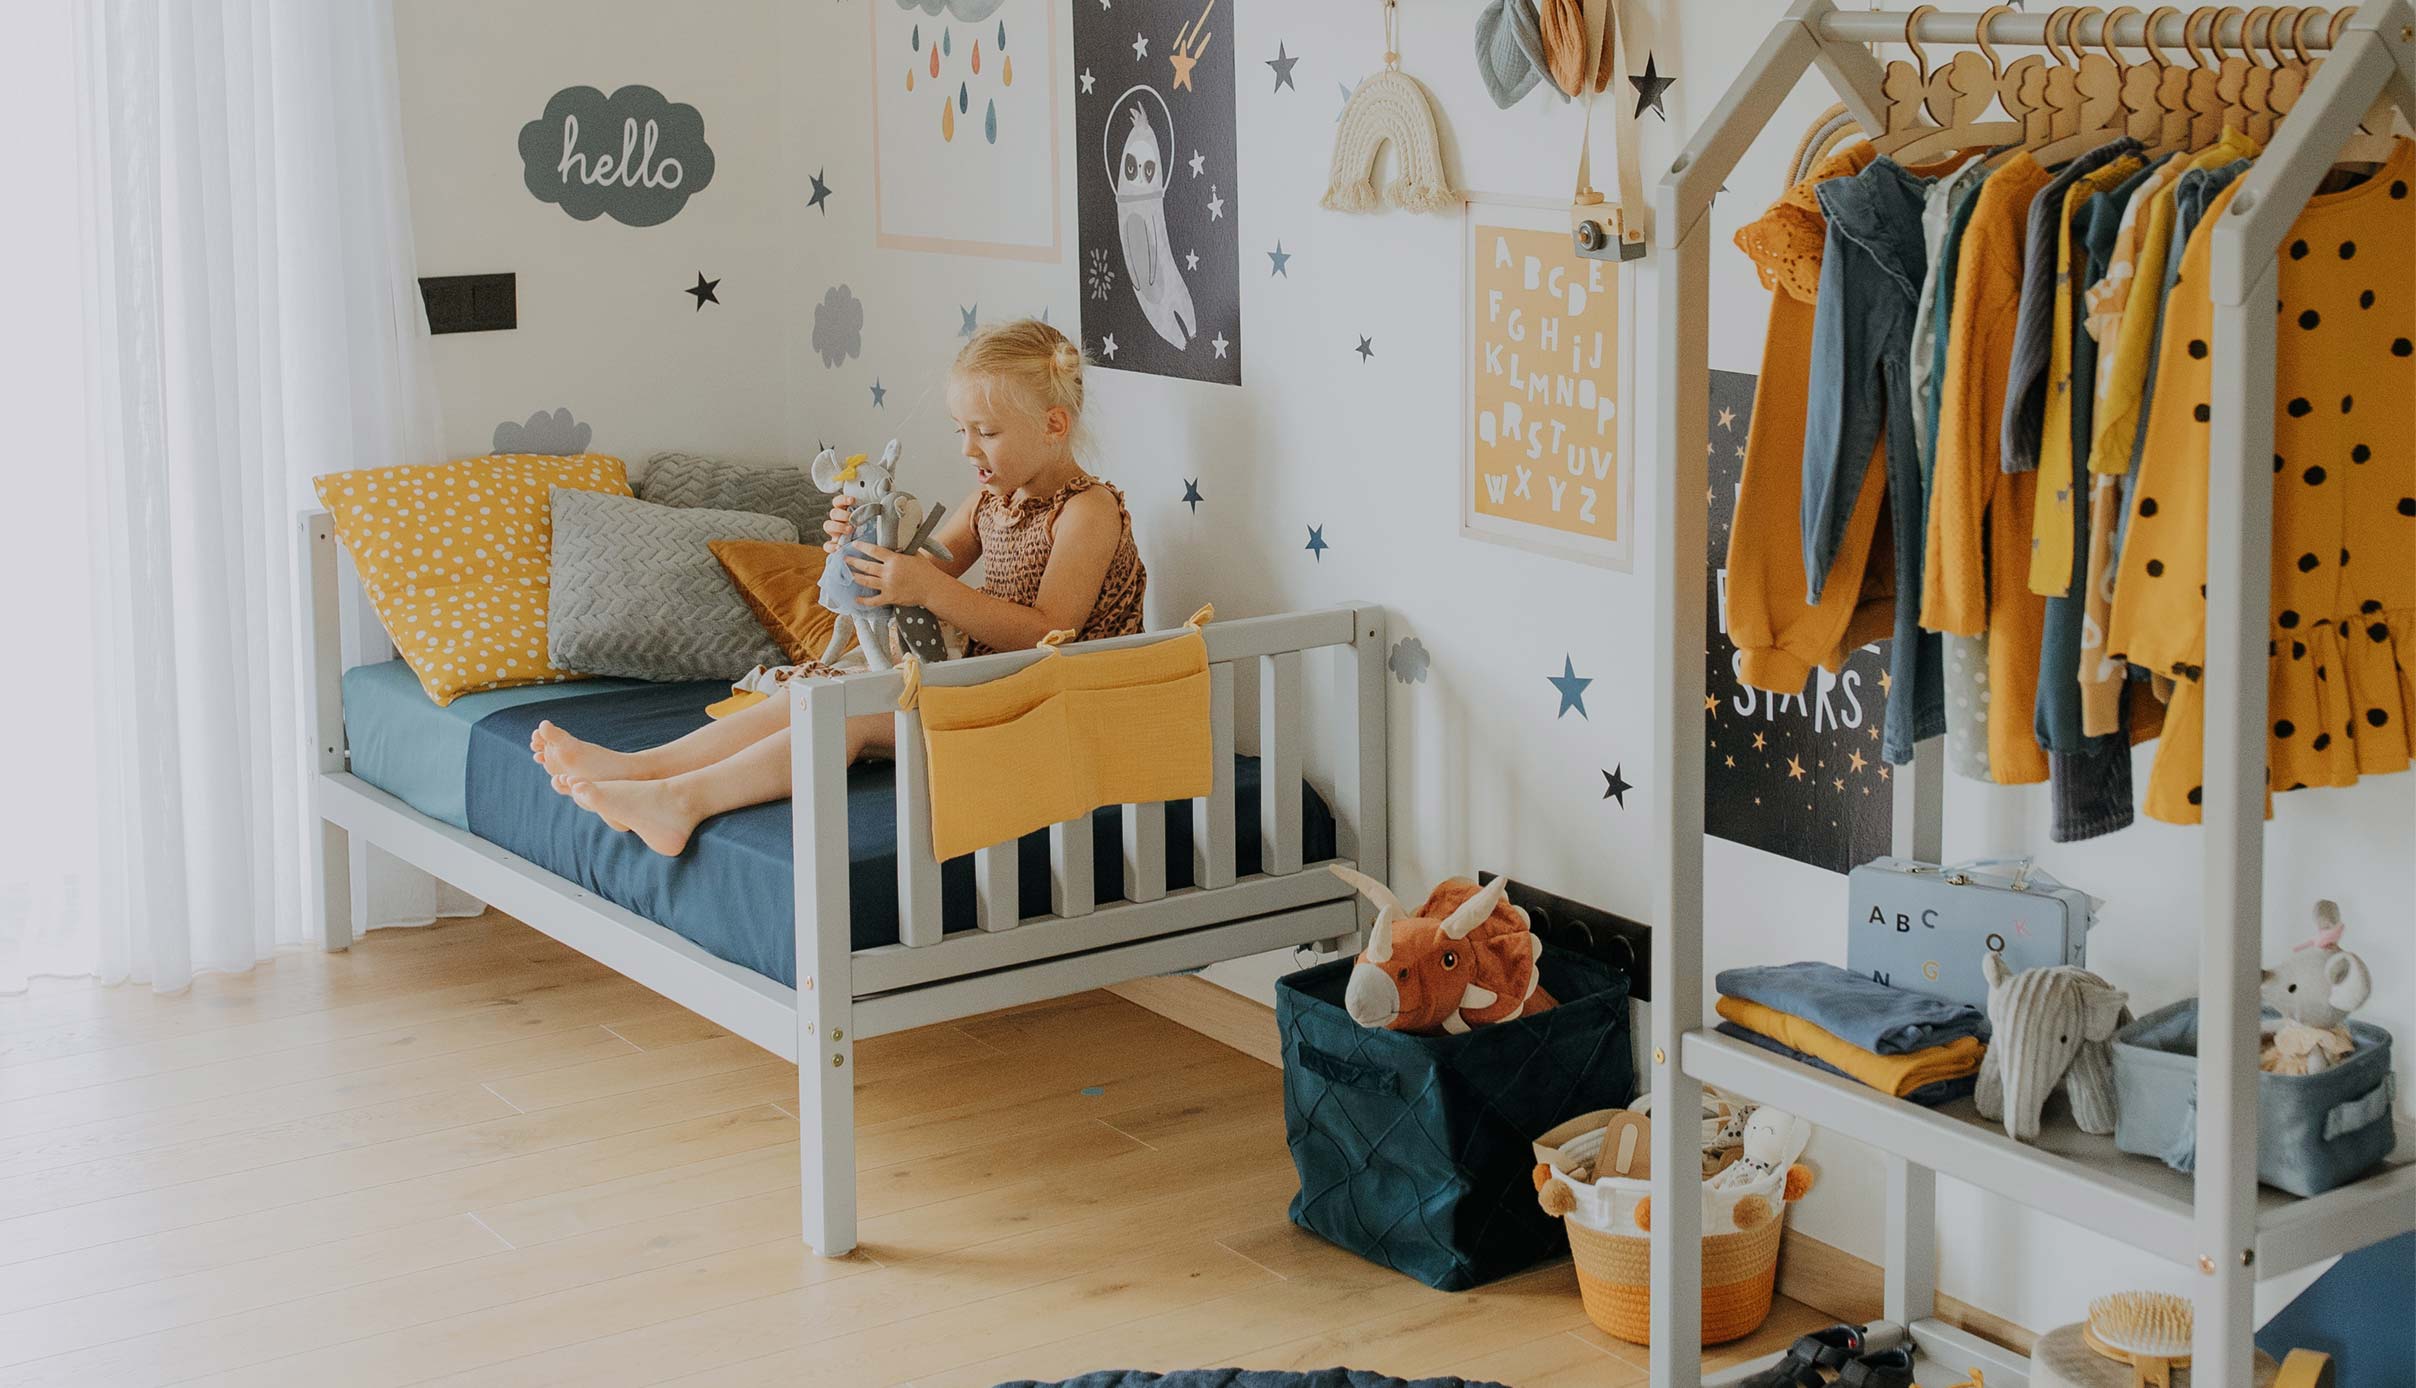 A child's bedroom with a yellow and blue theme.